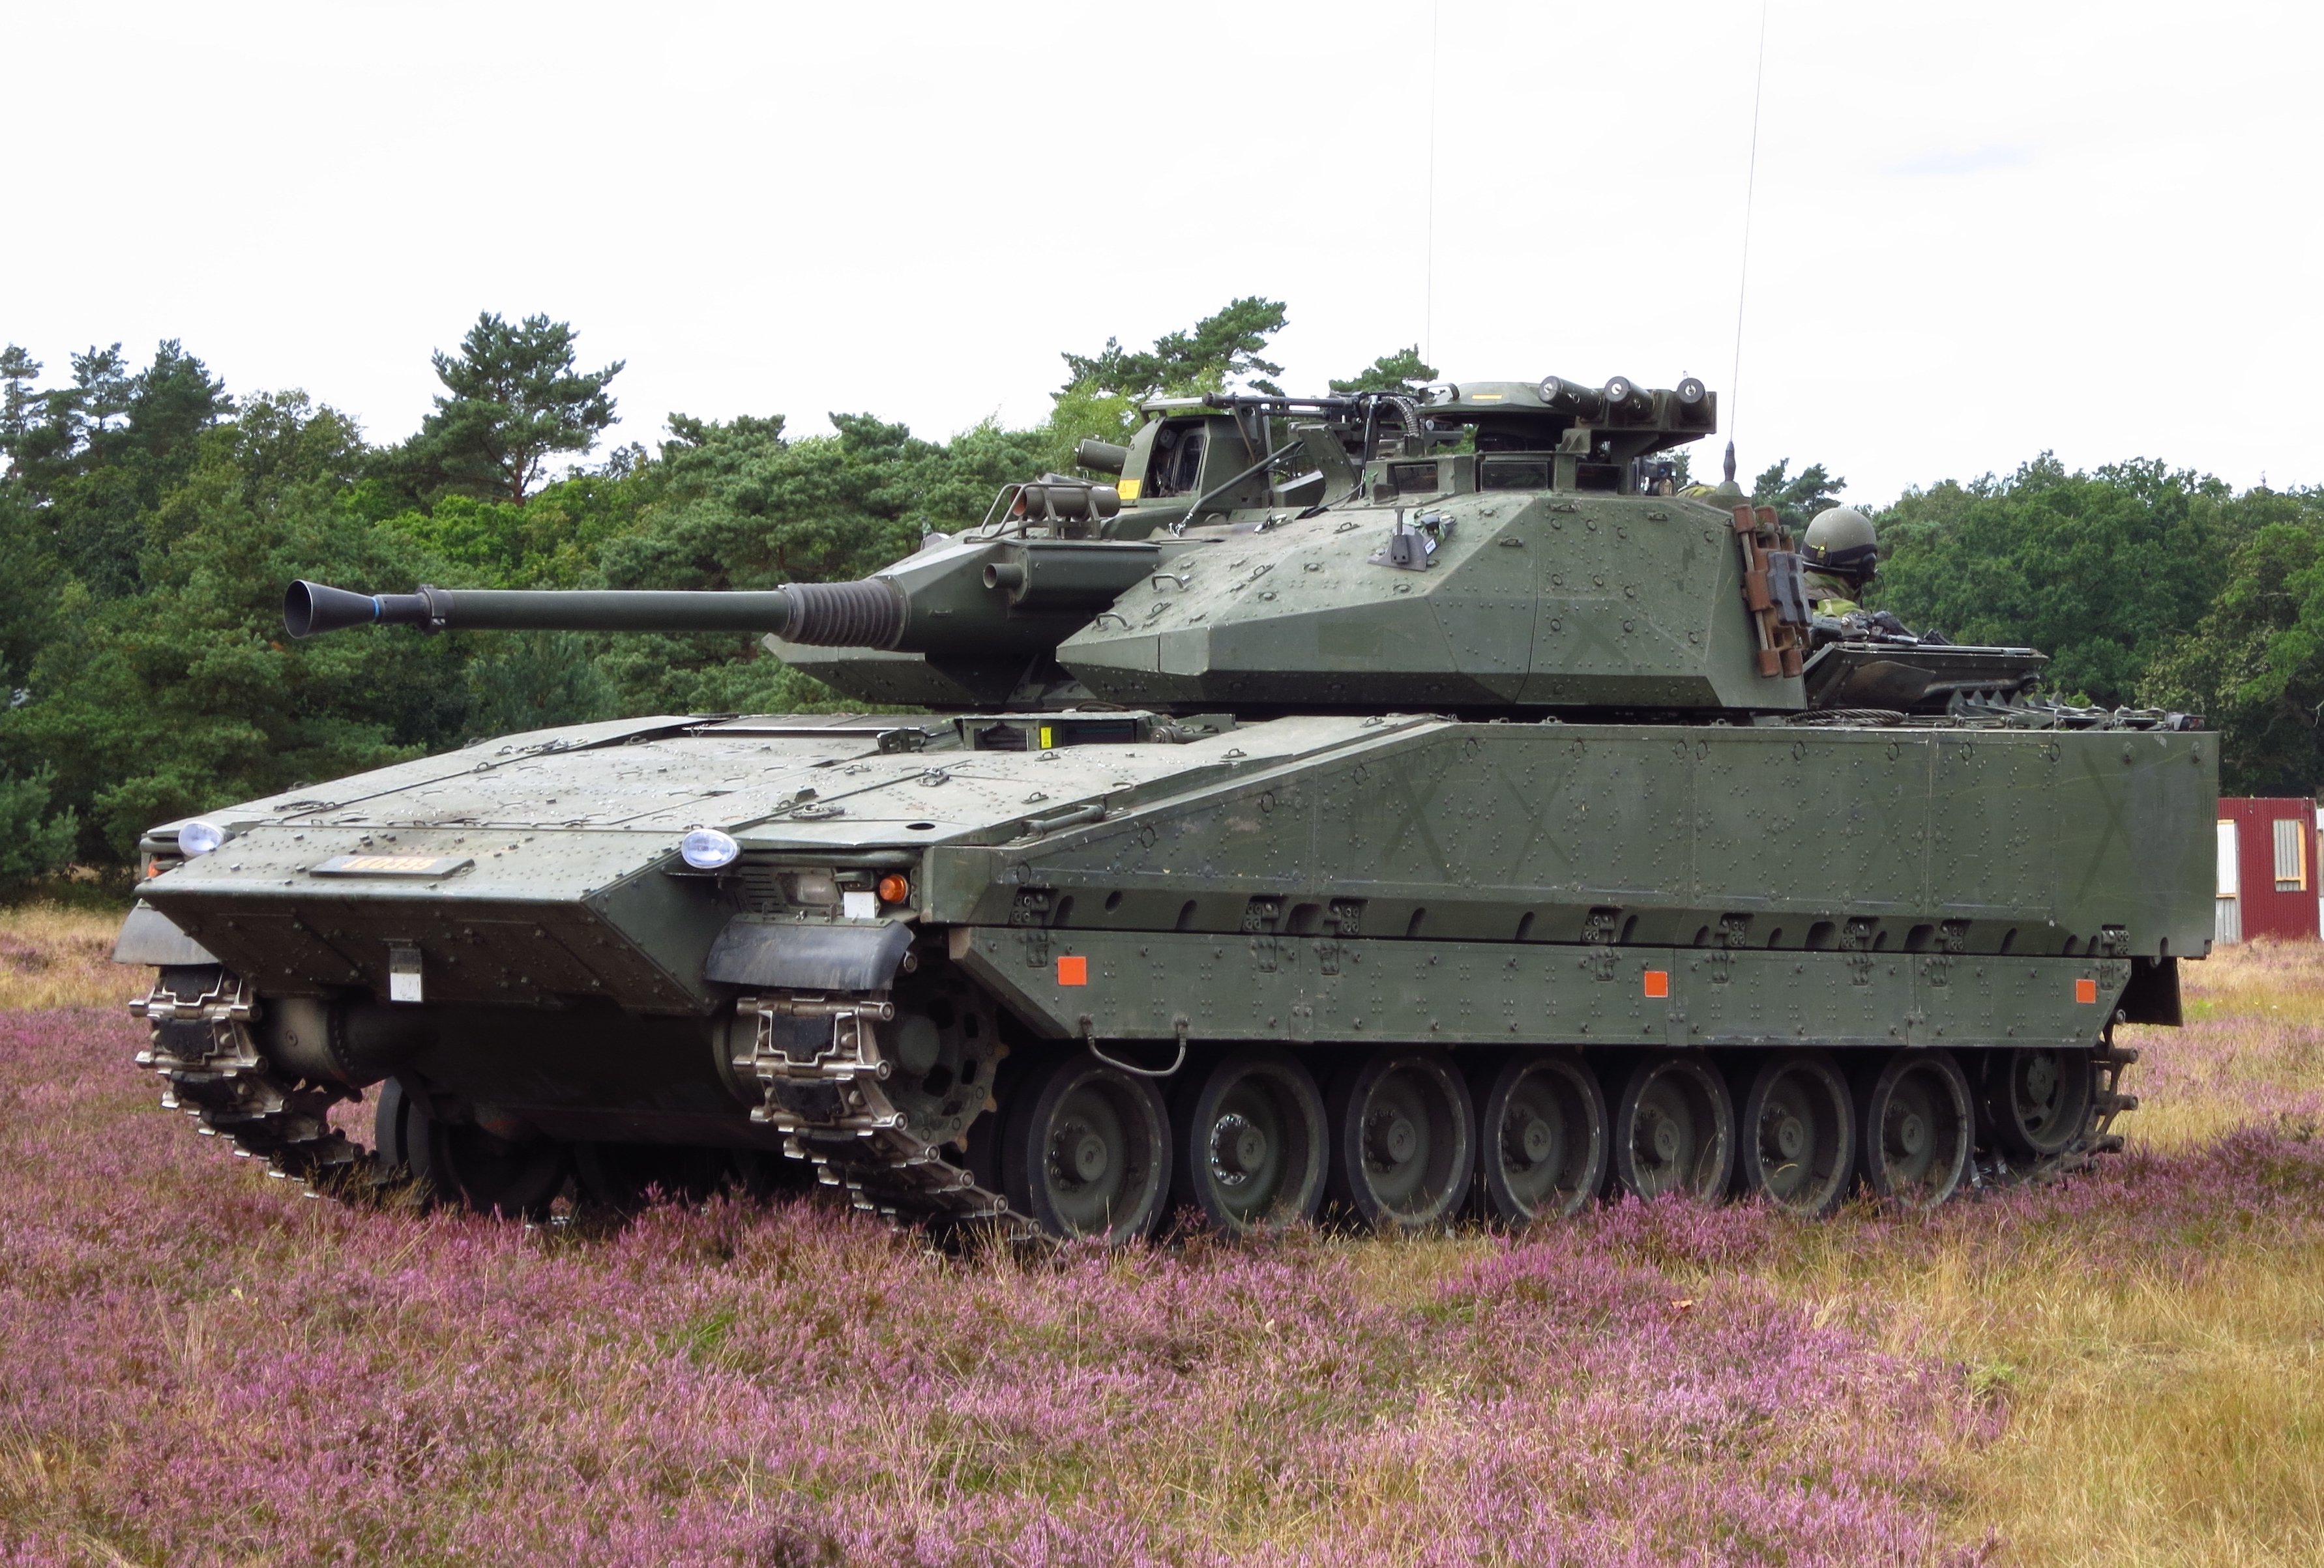 Thomas C. Theiner on Twitter: "?? Sweden!!! 50 (!!) CV90!!! This is unexpected, super welcome, and excellent. The CV90 is the most reliable European-made IFV and comes with a gun capable to